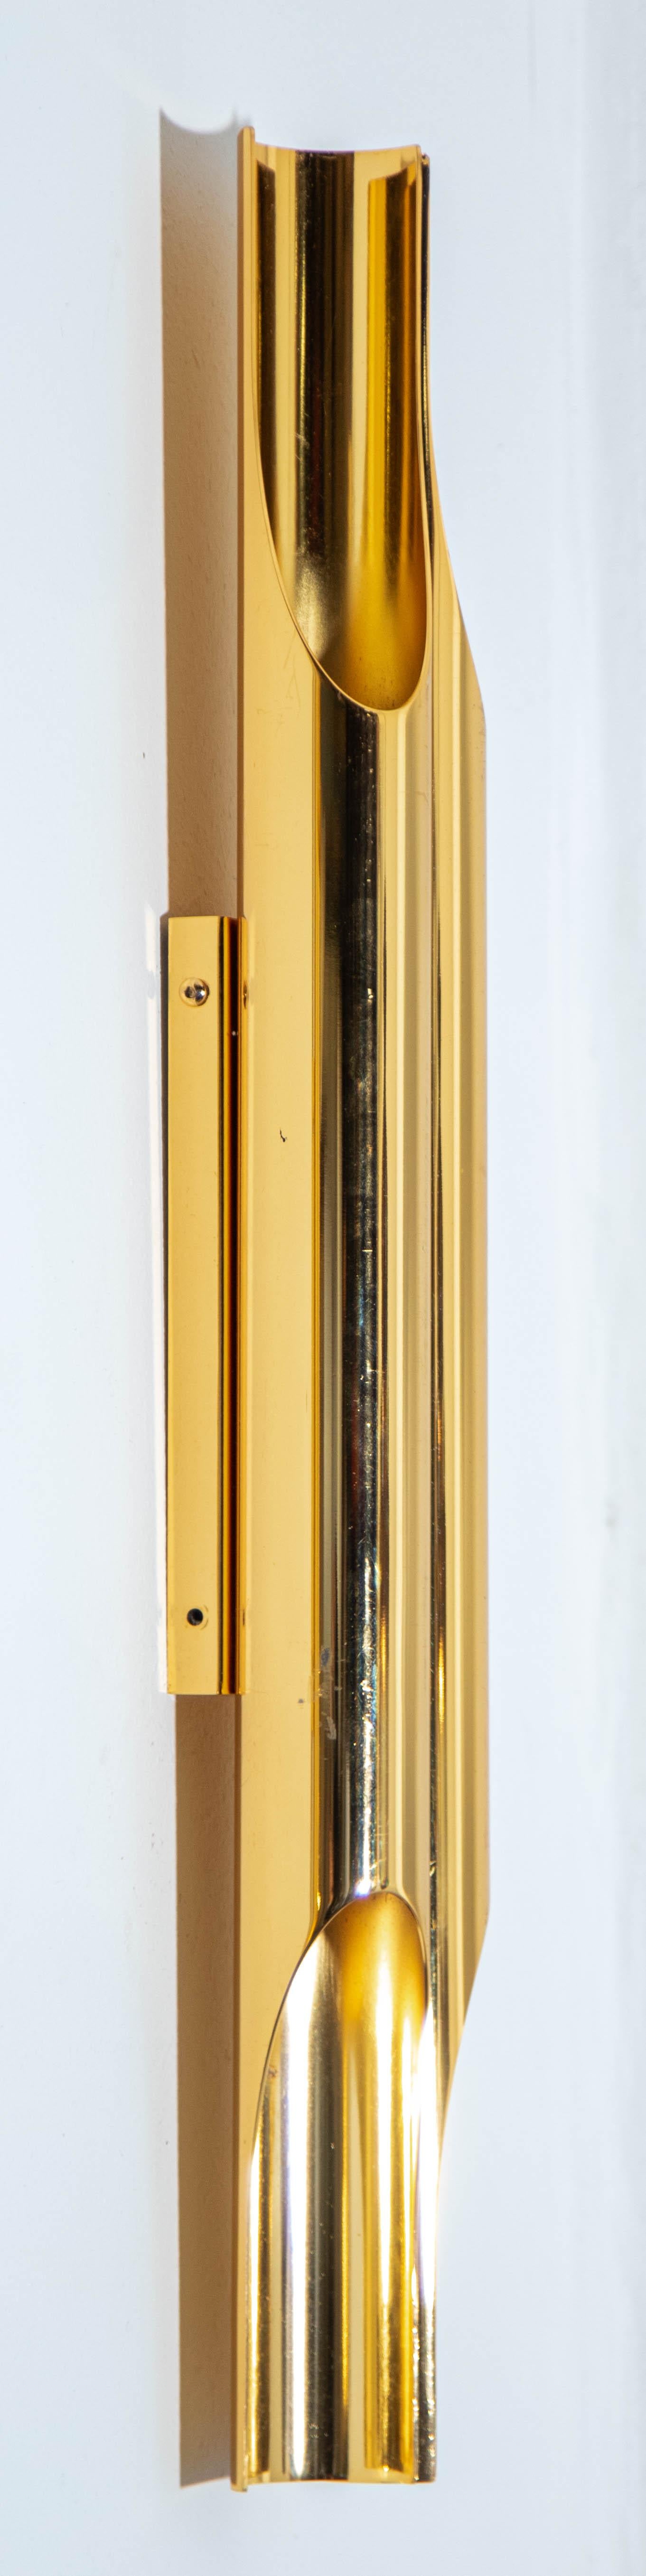 Italian Polished Brass Orgue Wall Sconce 1 of 5 For Sale 1